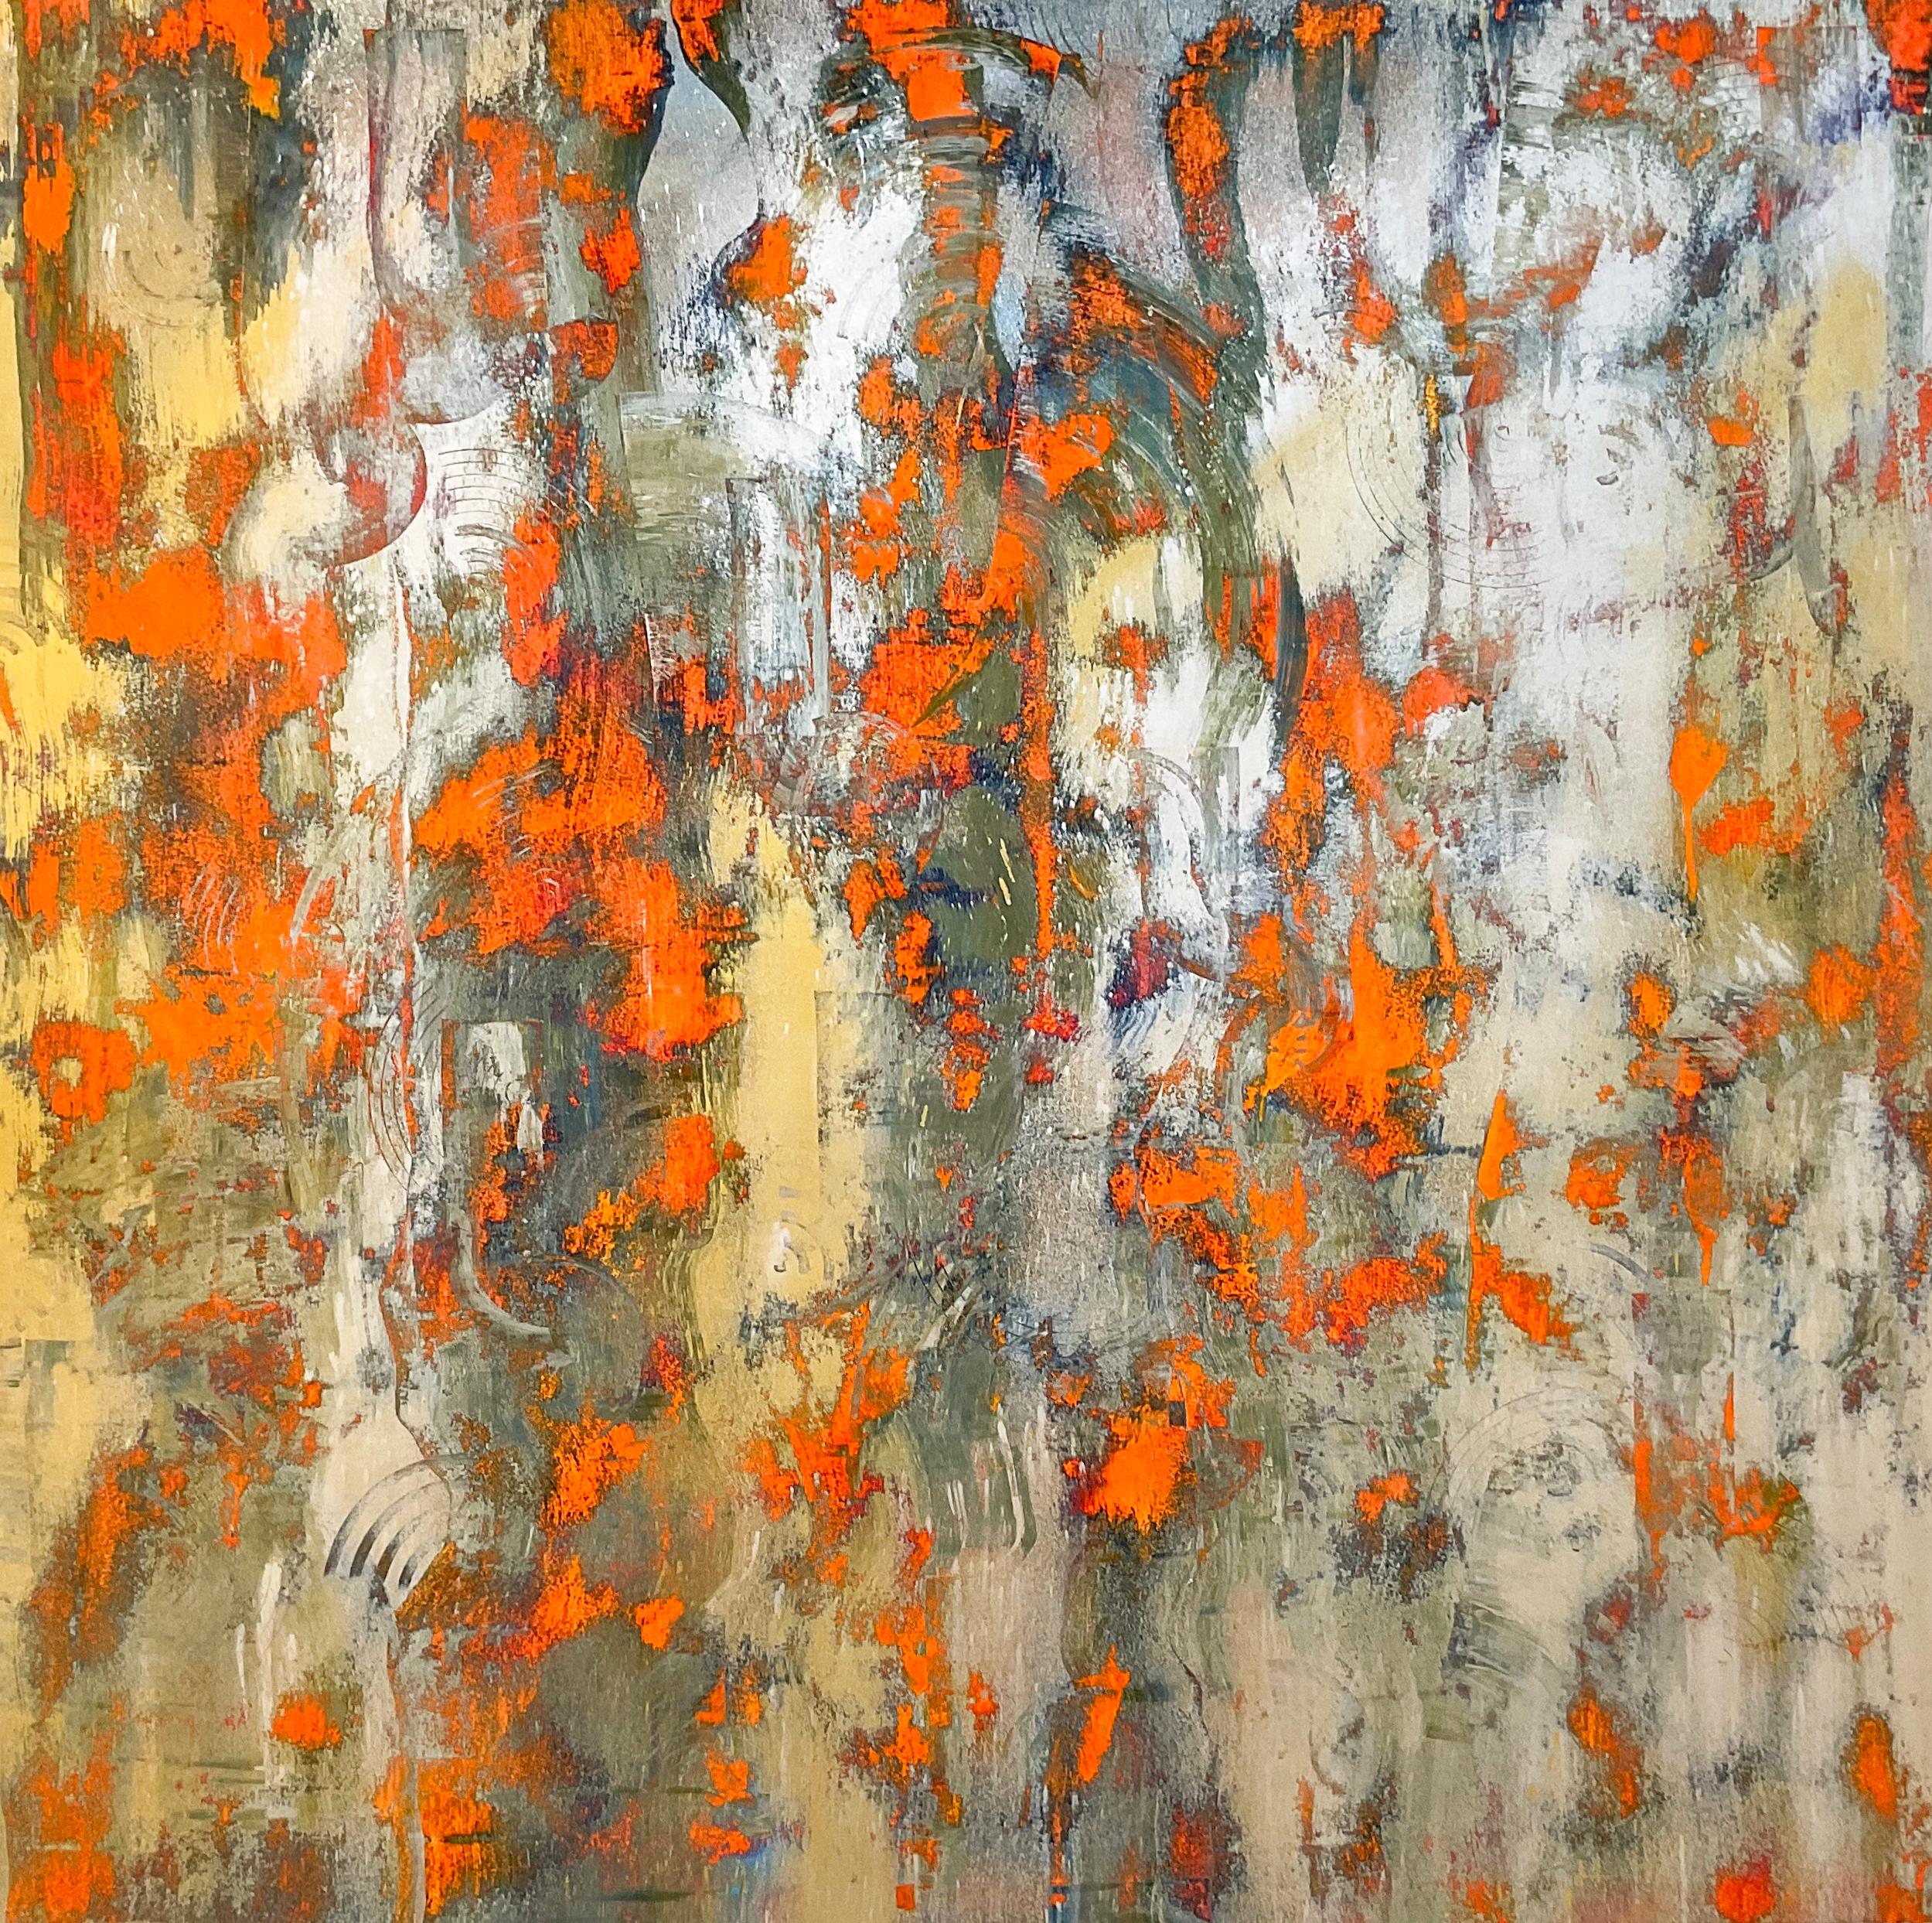 Untitled Orange Silver and Gold: Abstract Expressionist Painting